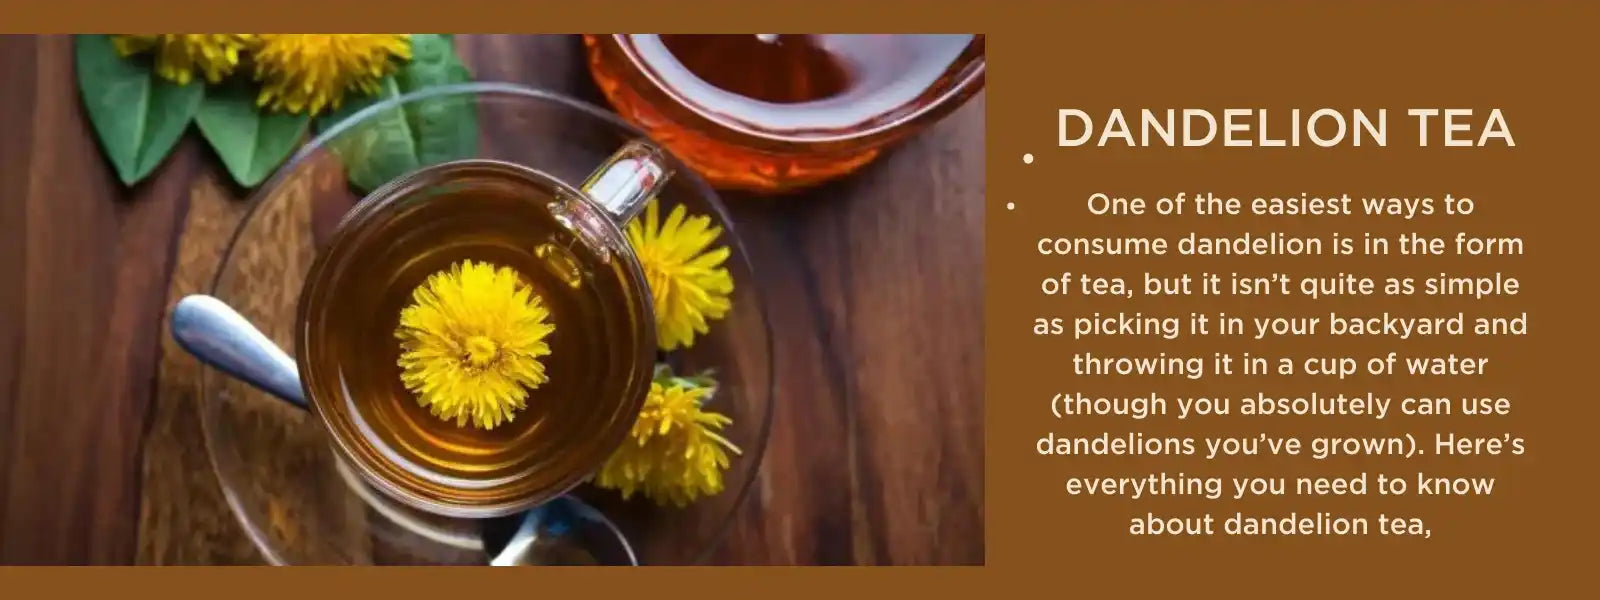 Dandelion tea - Health Benefits, Uses and Important Facts